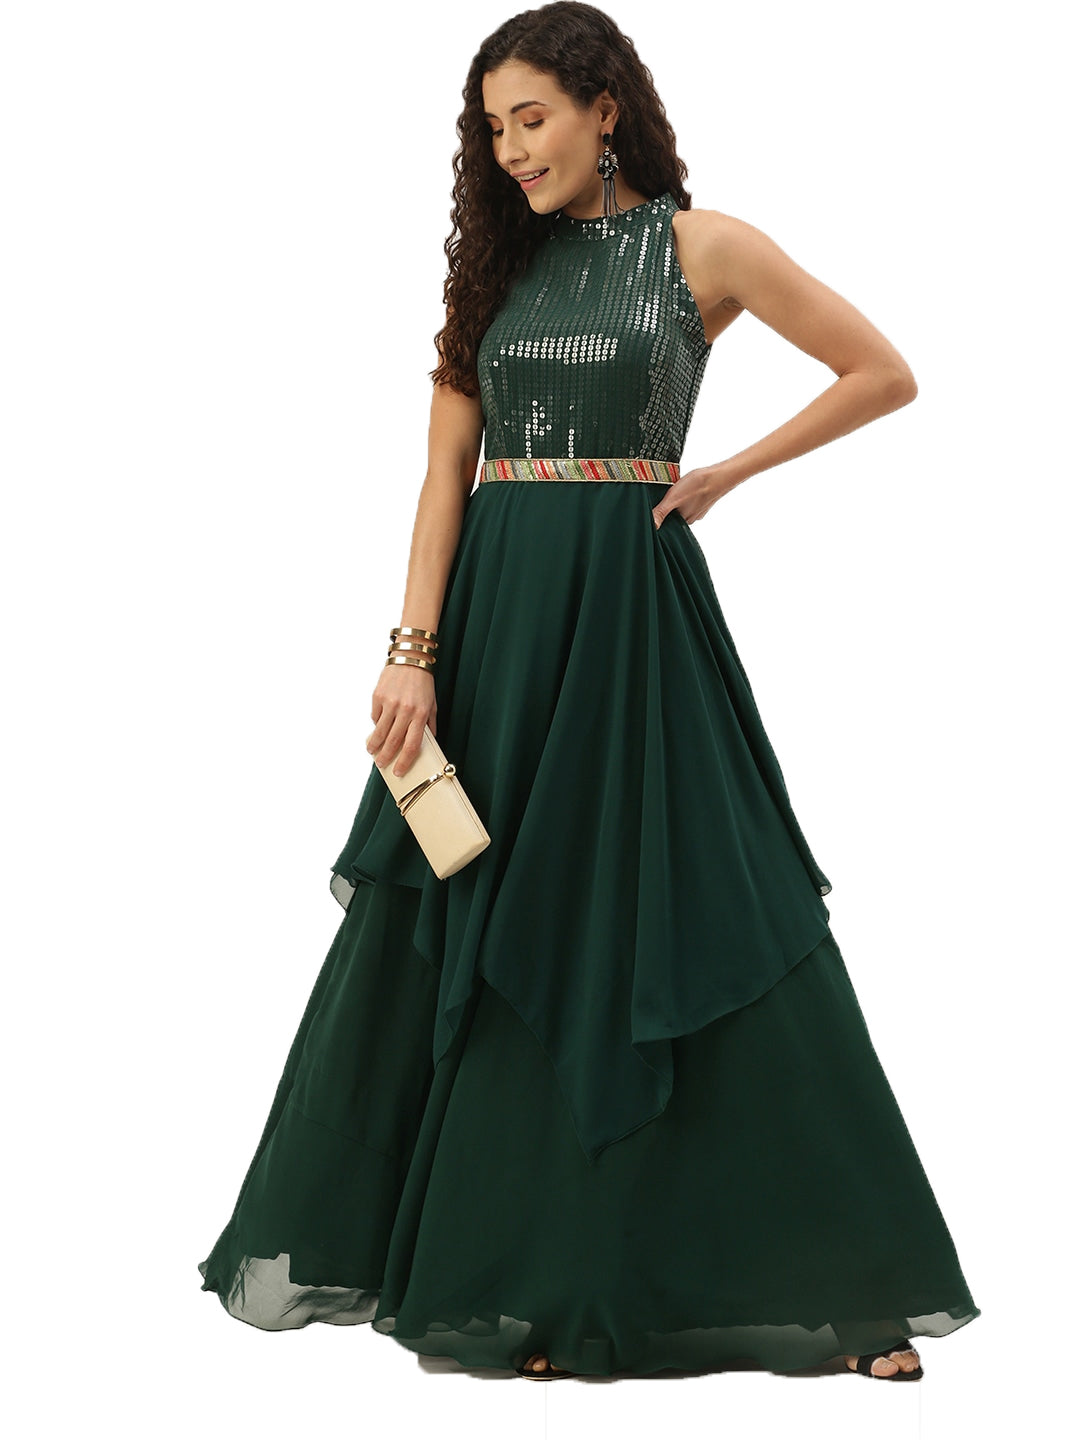 Green-Embroidered-Handkerchief-Gown